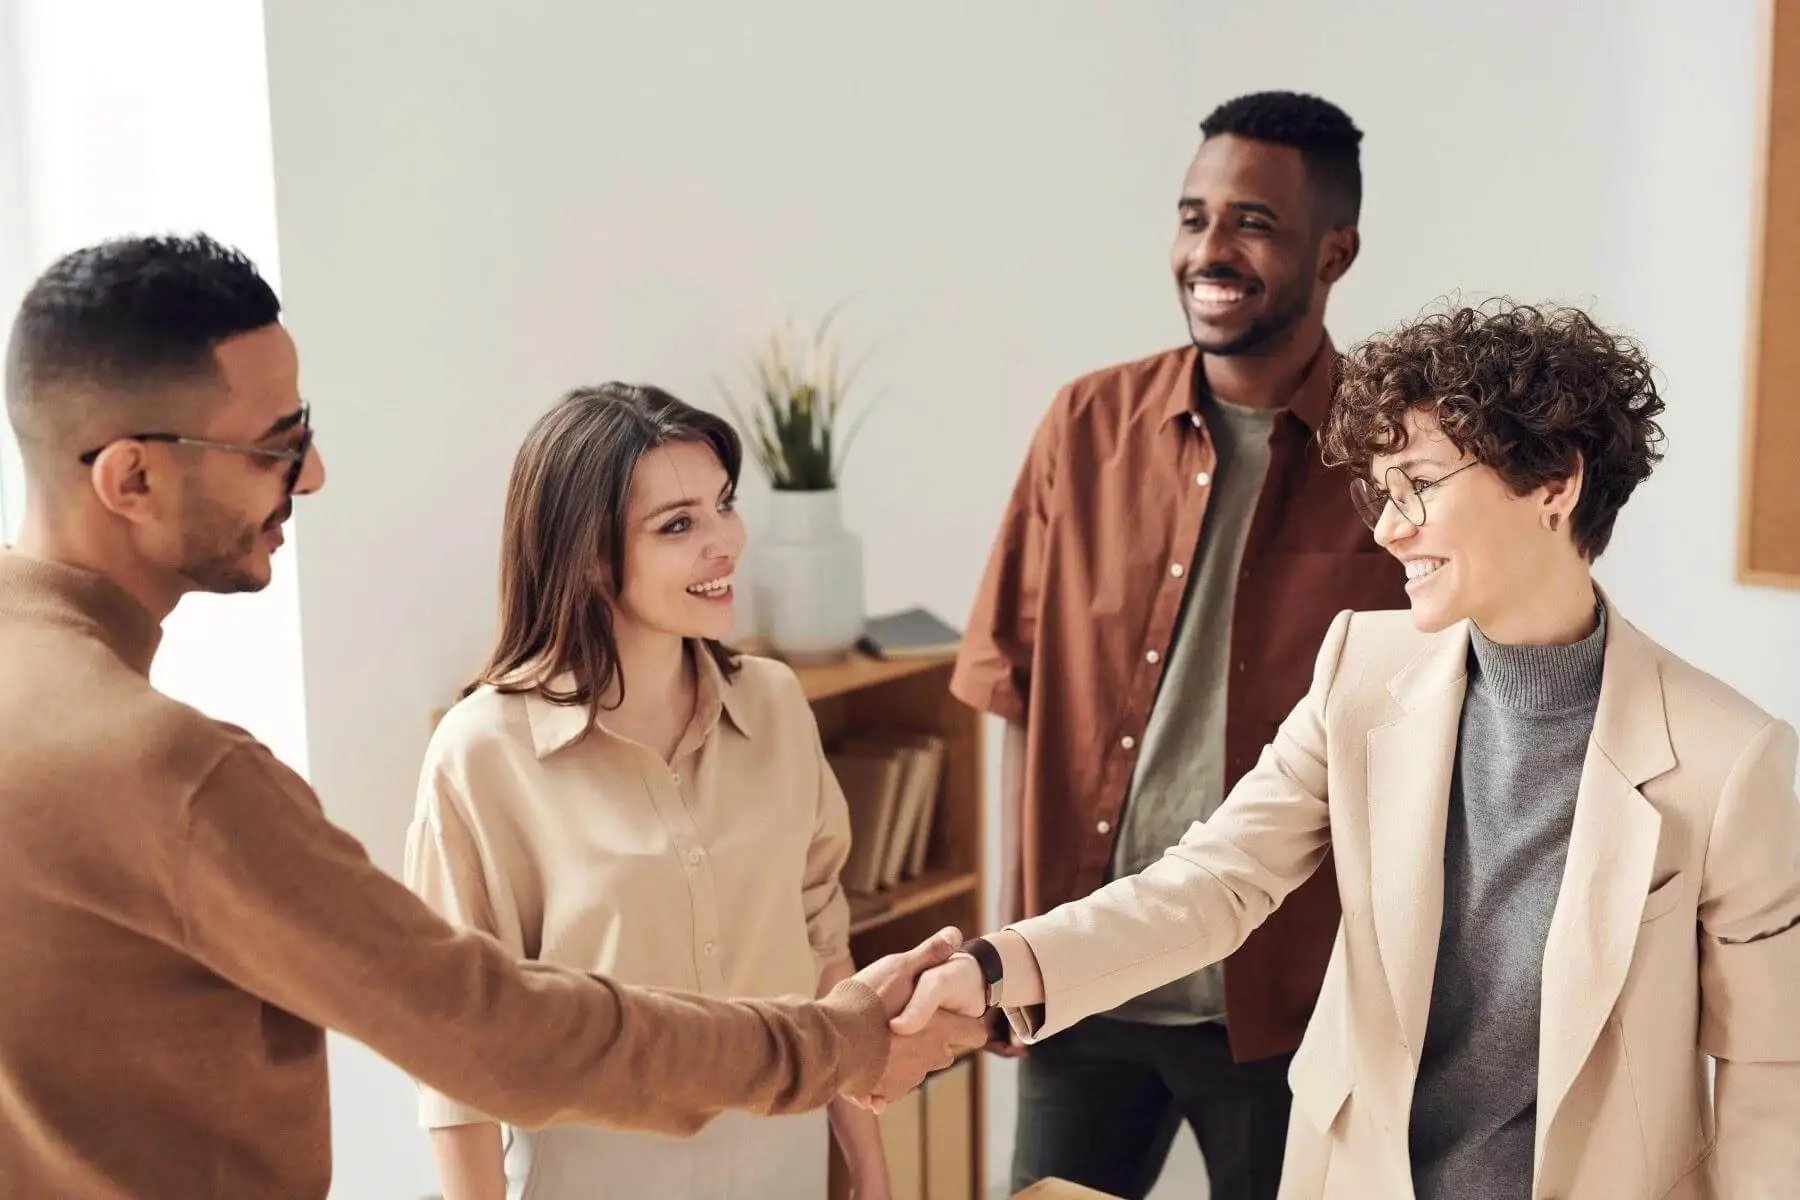 A diverse group of business people are greeting each other. Two of them, a man and a woman, are shaking hands. The other two, also a man and a woman, are smiling in greeting